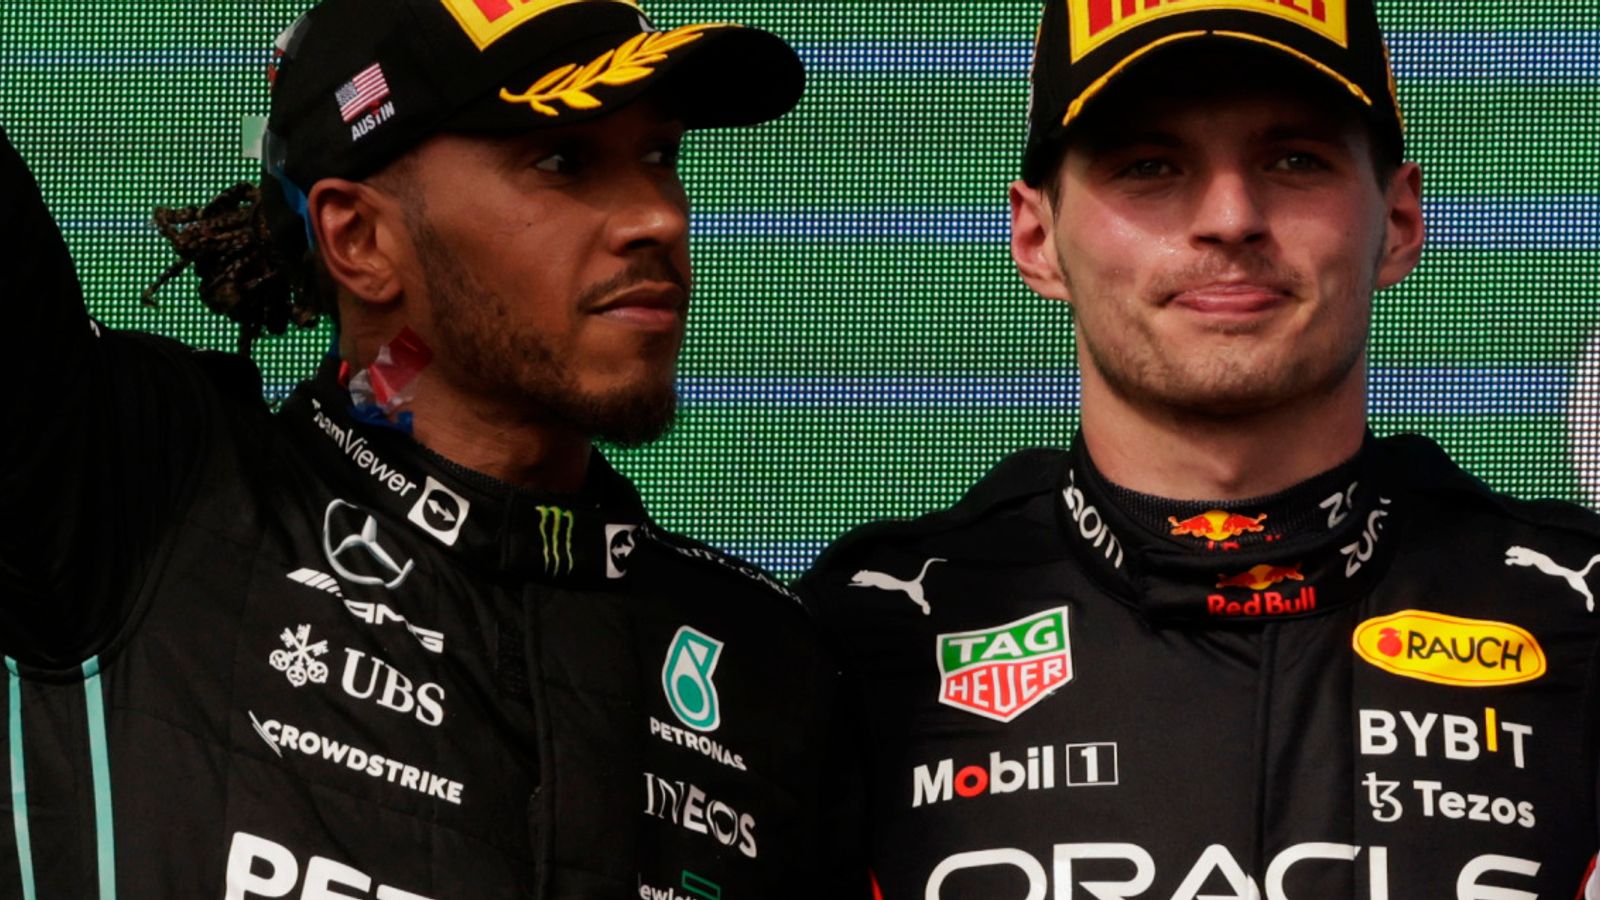 United States GP: Max Verstappen denies Lewis Hamilton first 2022 win with late overtake as Red Bull clinch constructors' title | F1 News thumbnail